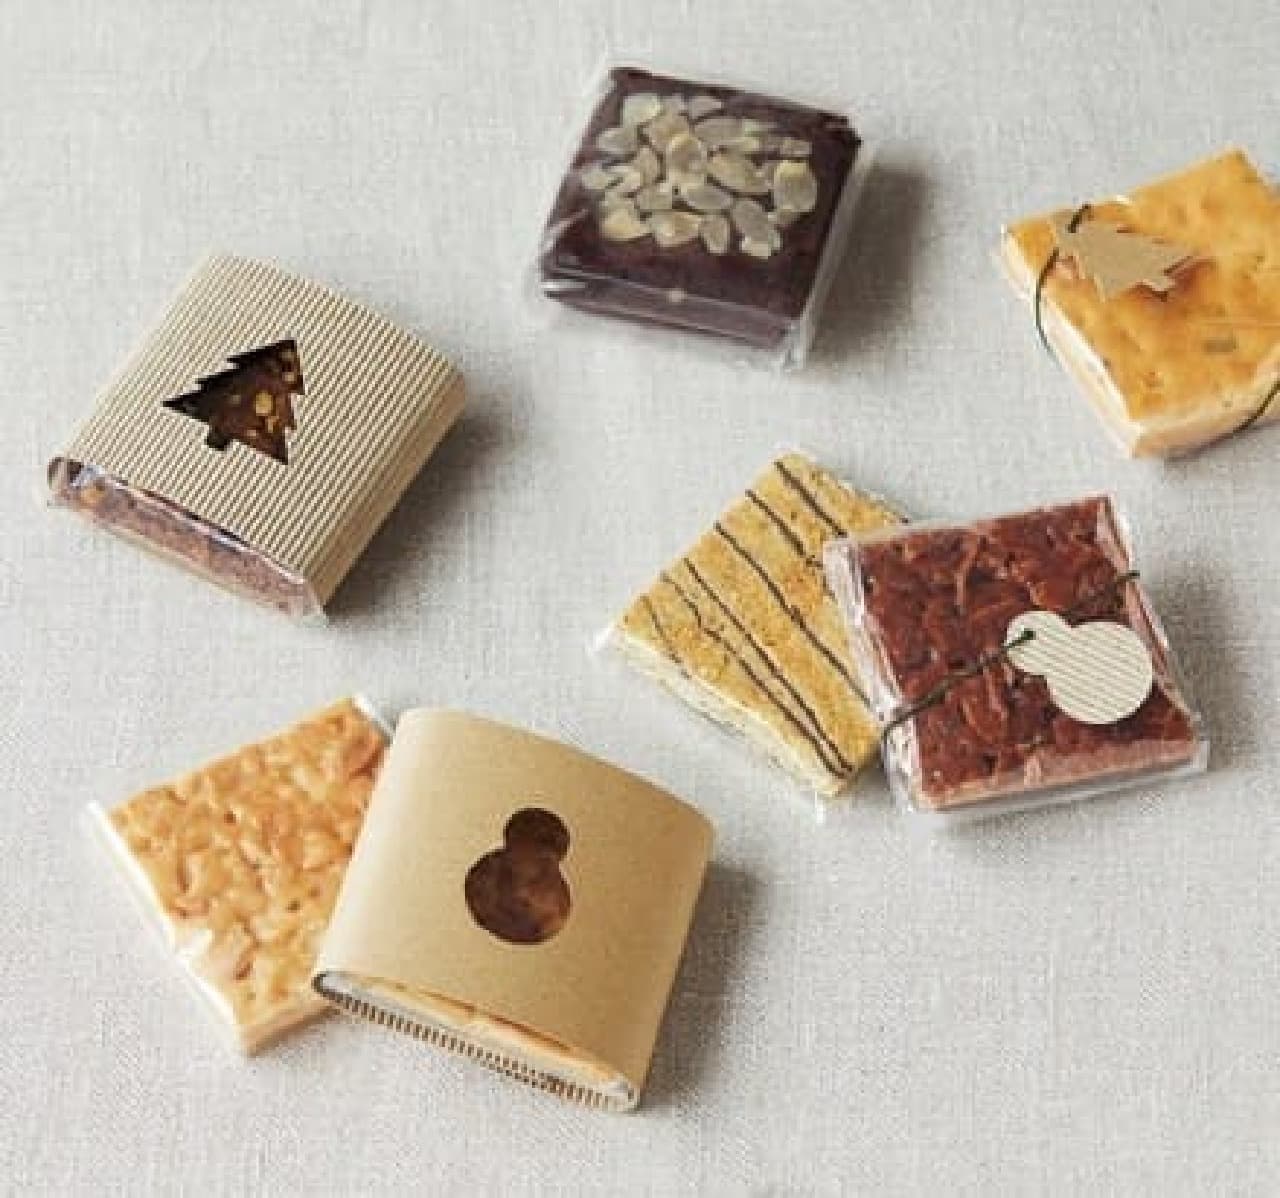 MUJI "Gift Confectionery"